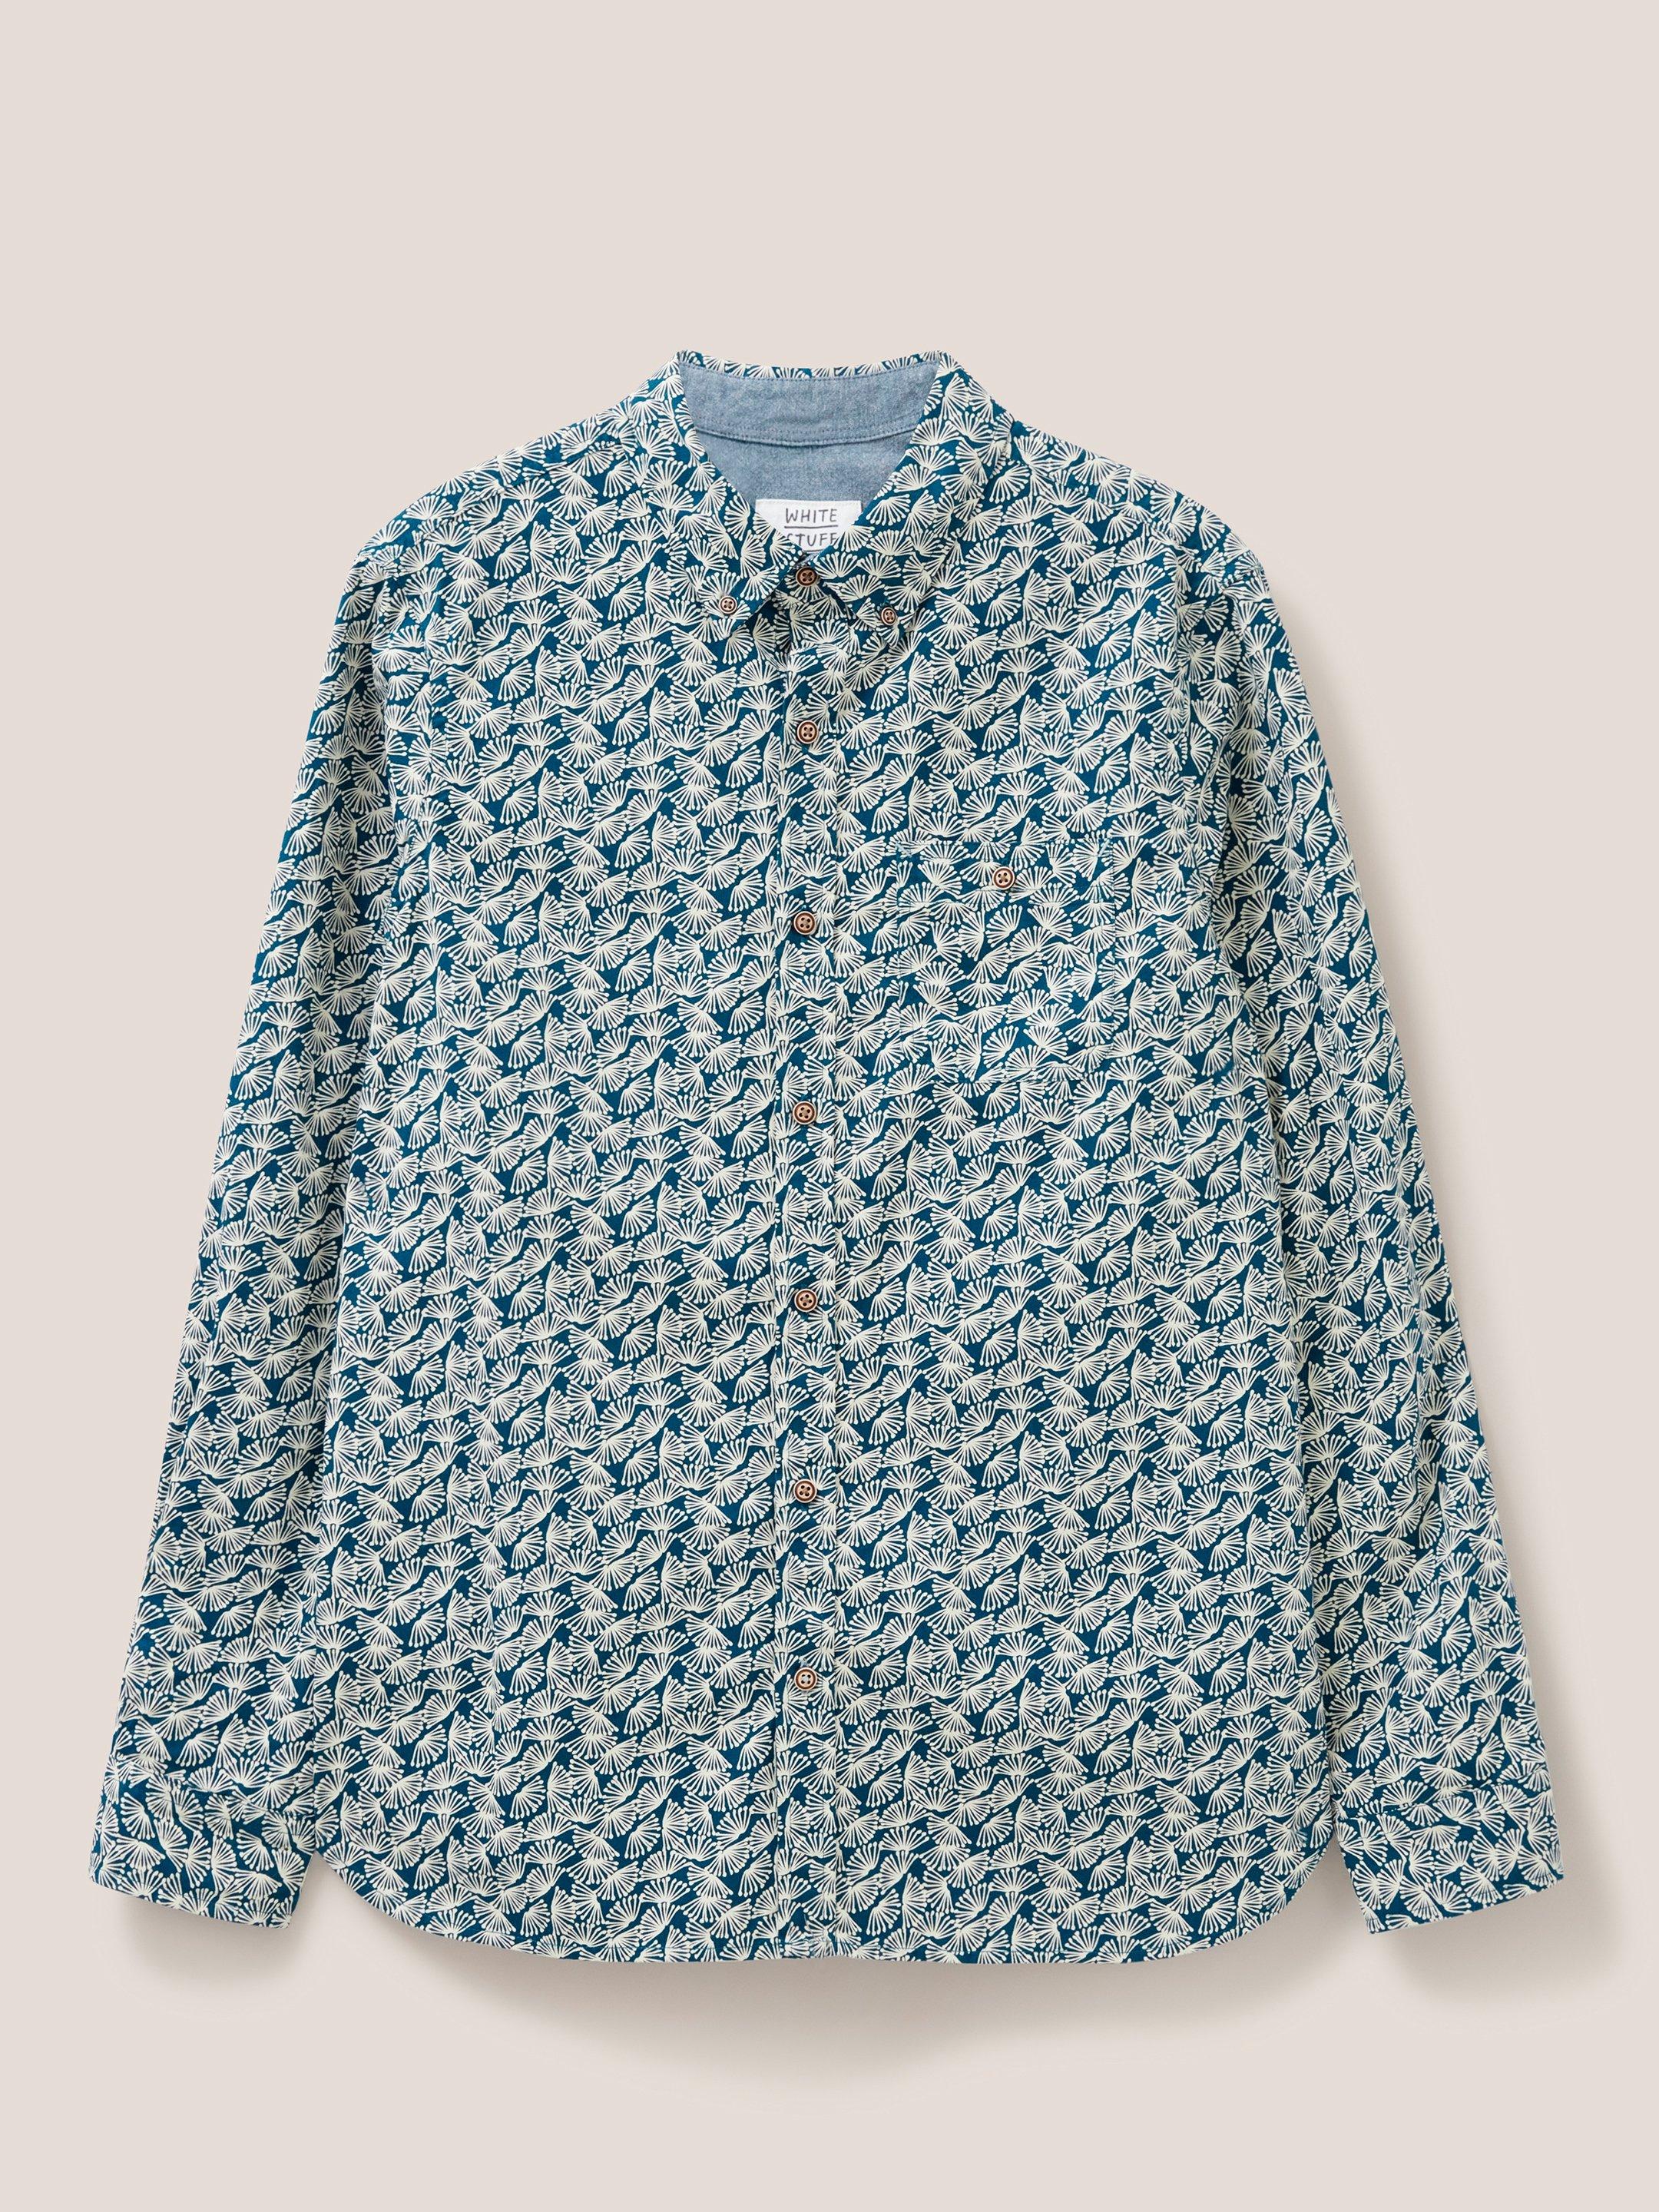 Dandelion Printed Shirt in MID TEAL - FLAT FRONT